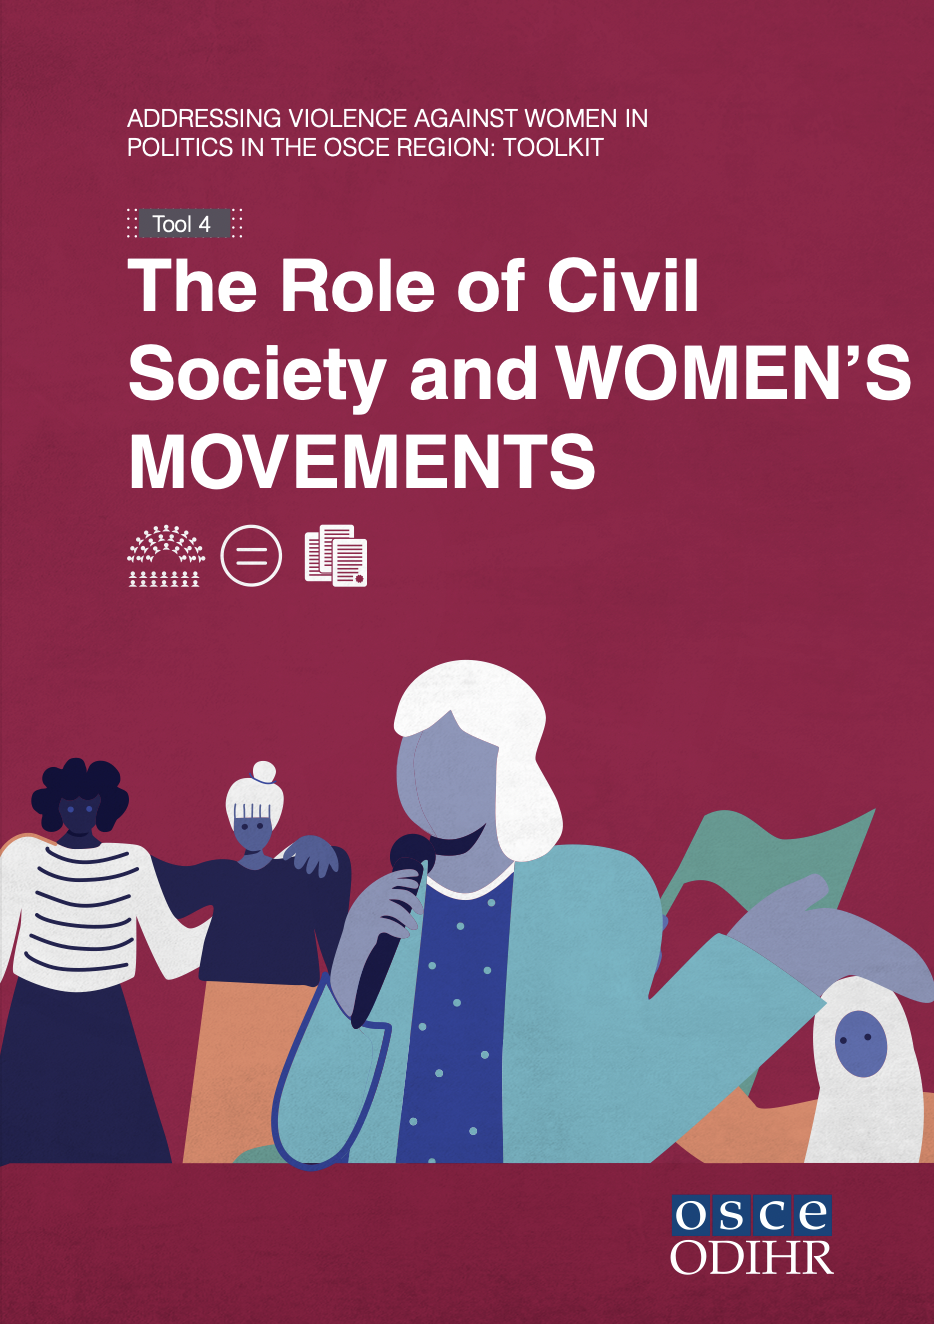 The Role of Civil Society and Women's Movements - Tool 4